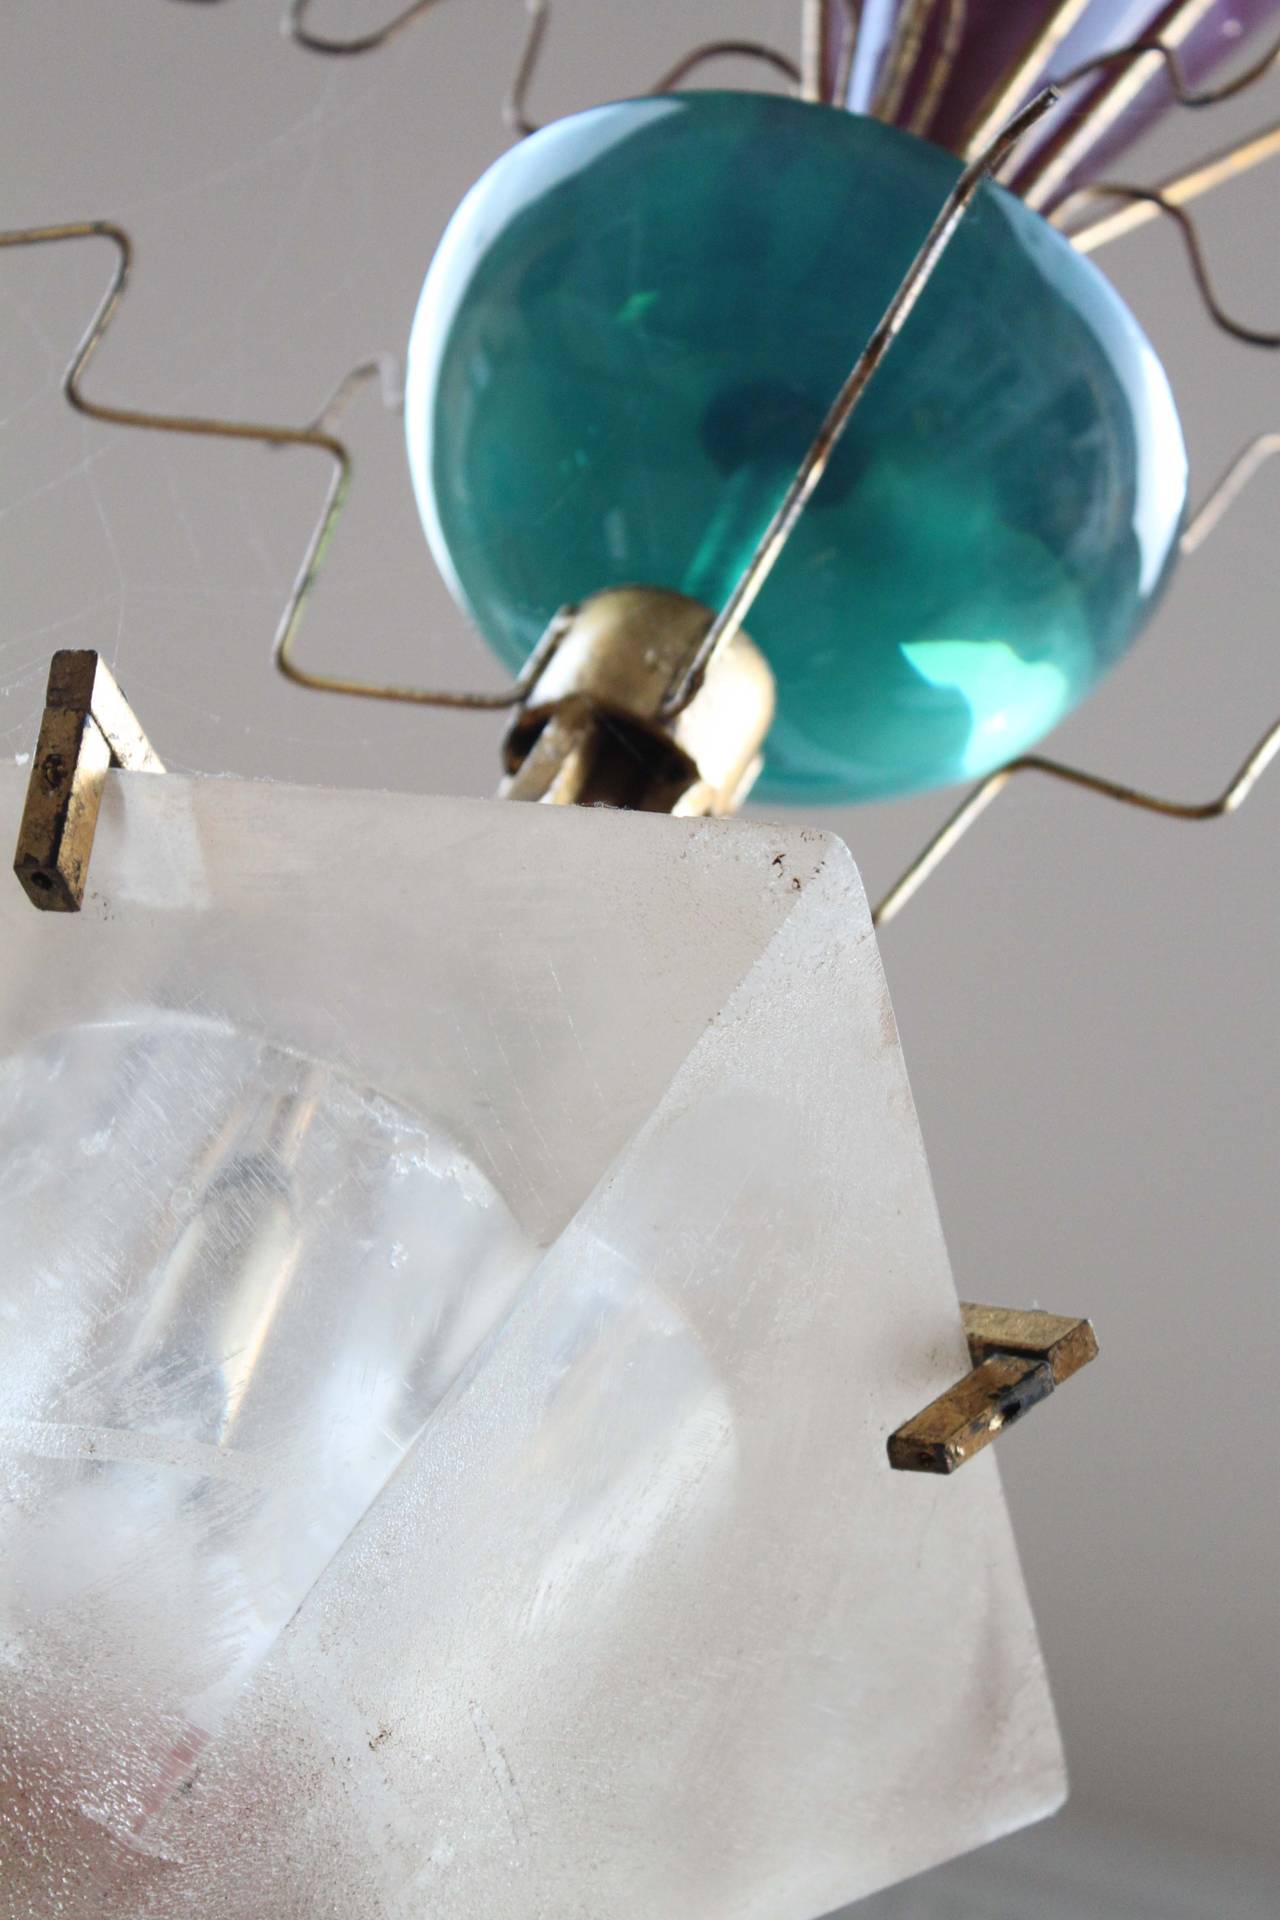 American Unusual Lucite Pendant Light Fixture Attributed to Van Teal For Sale